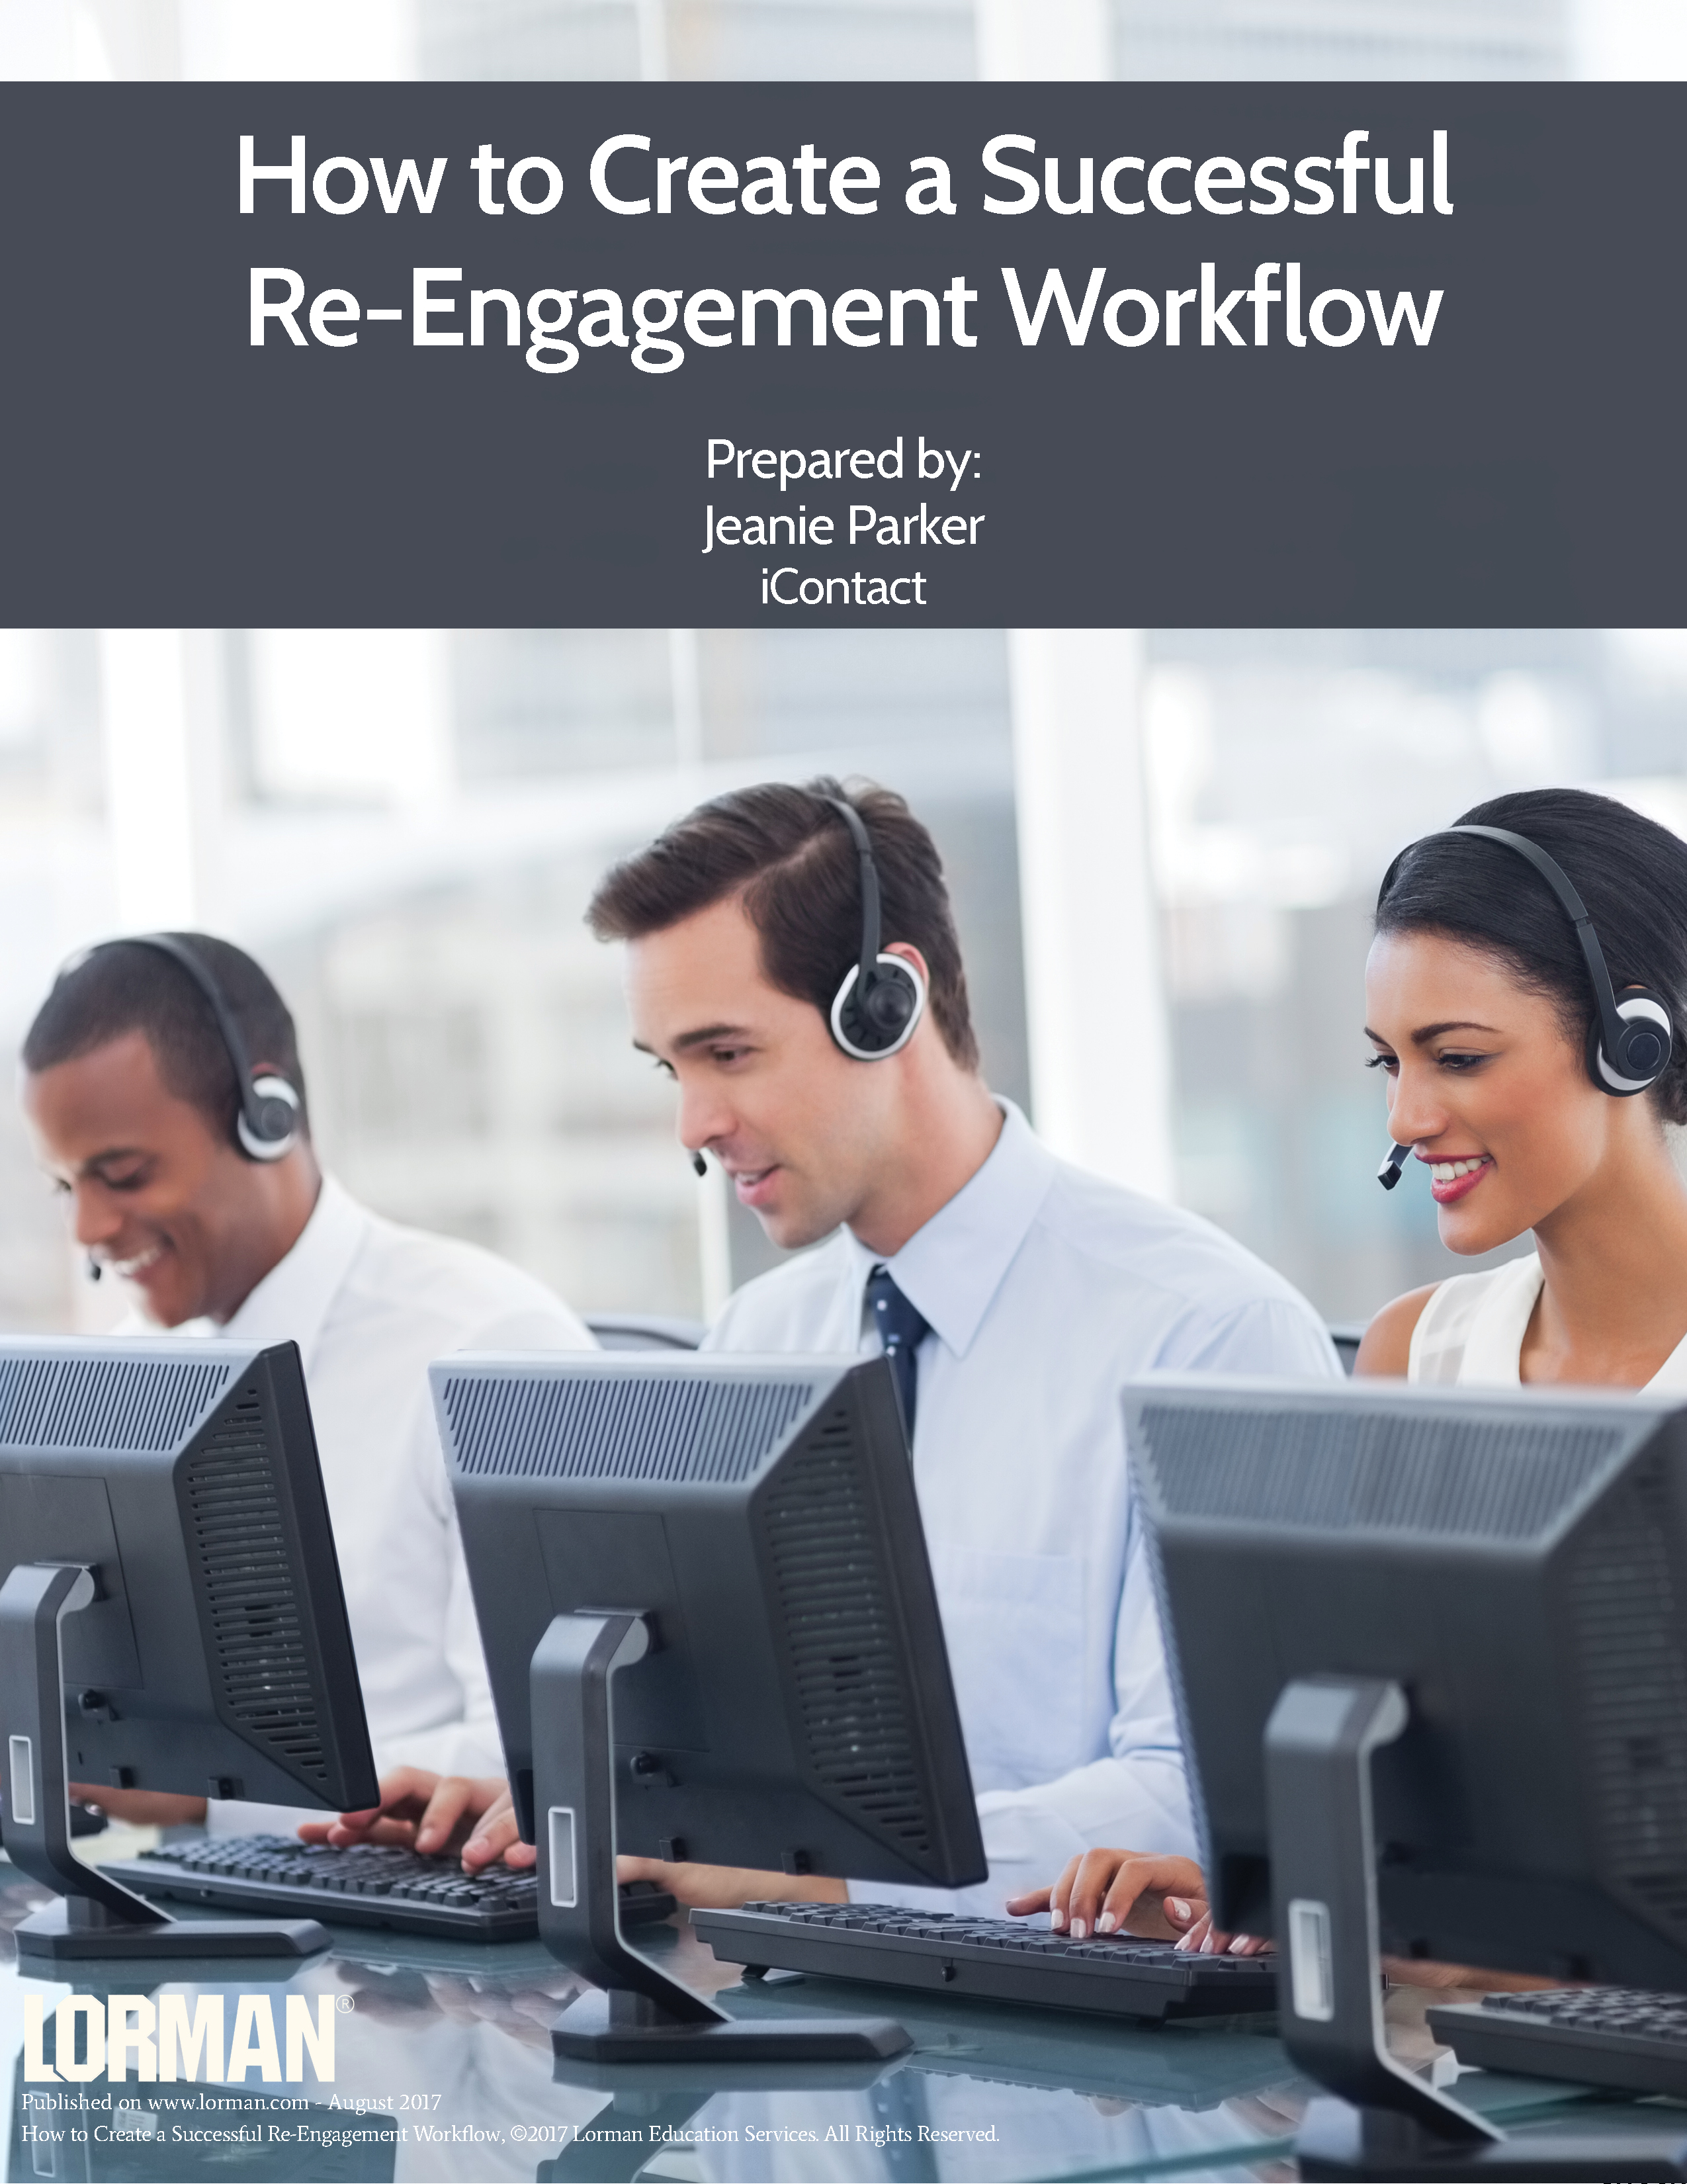 How to Create a Successful Re-Engagement Workflow